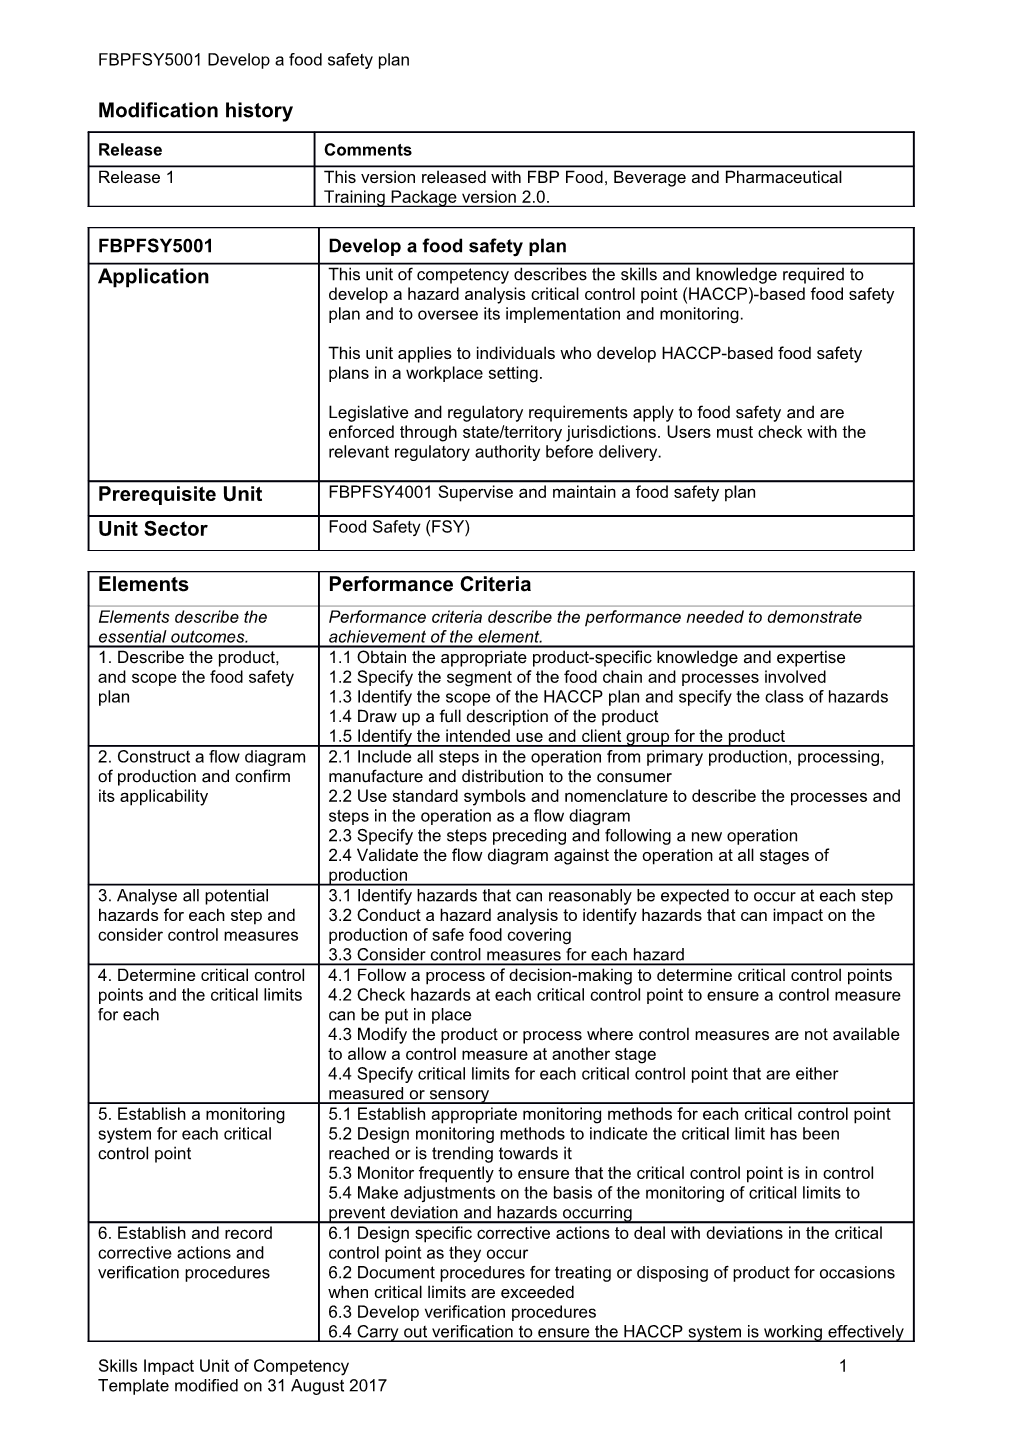 Skills Impact Unit of Competency Template s27